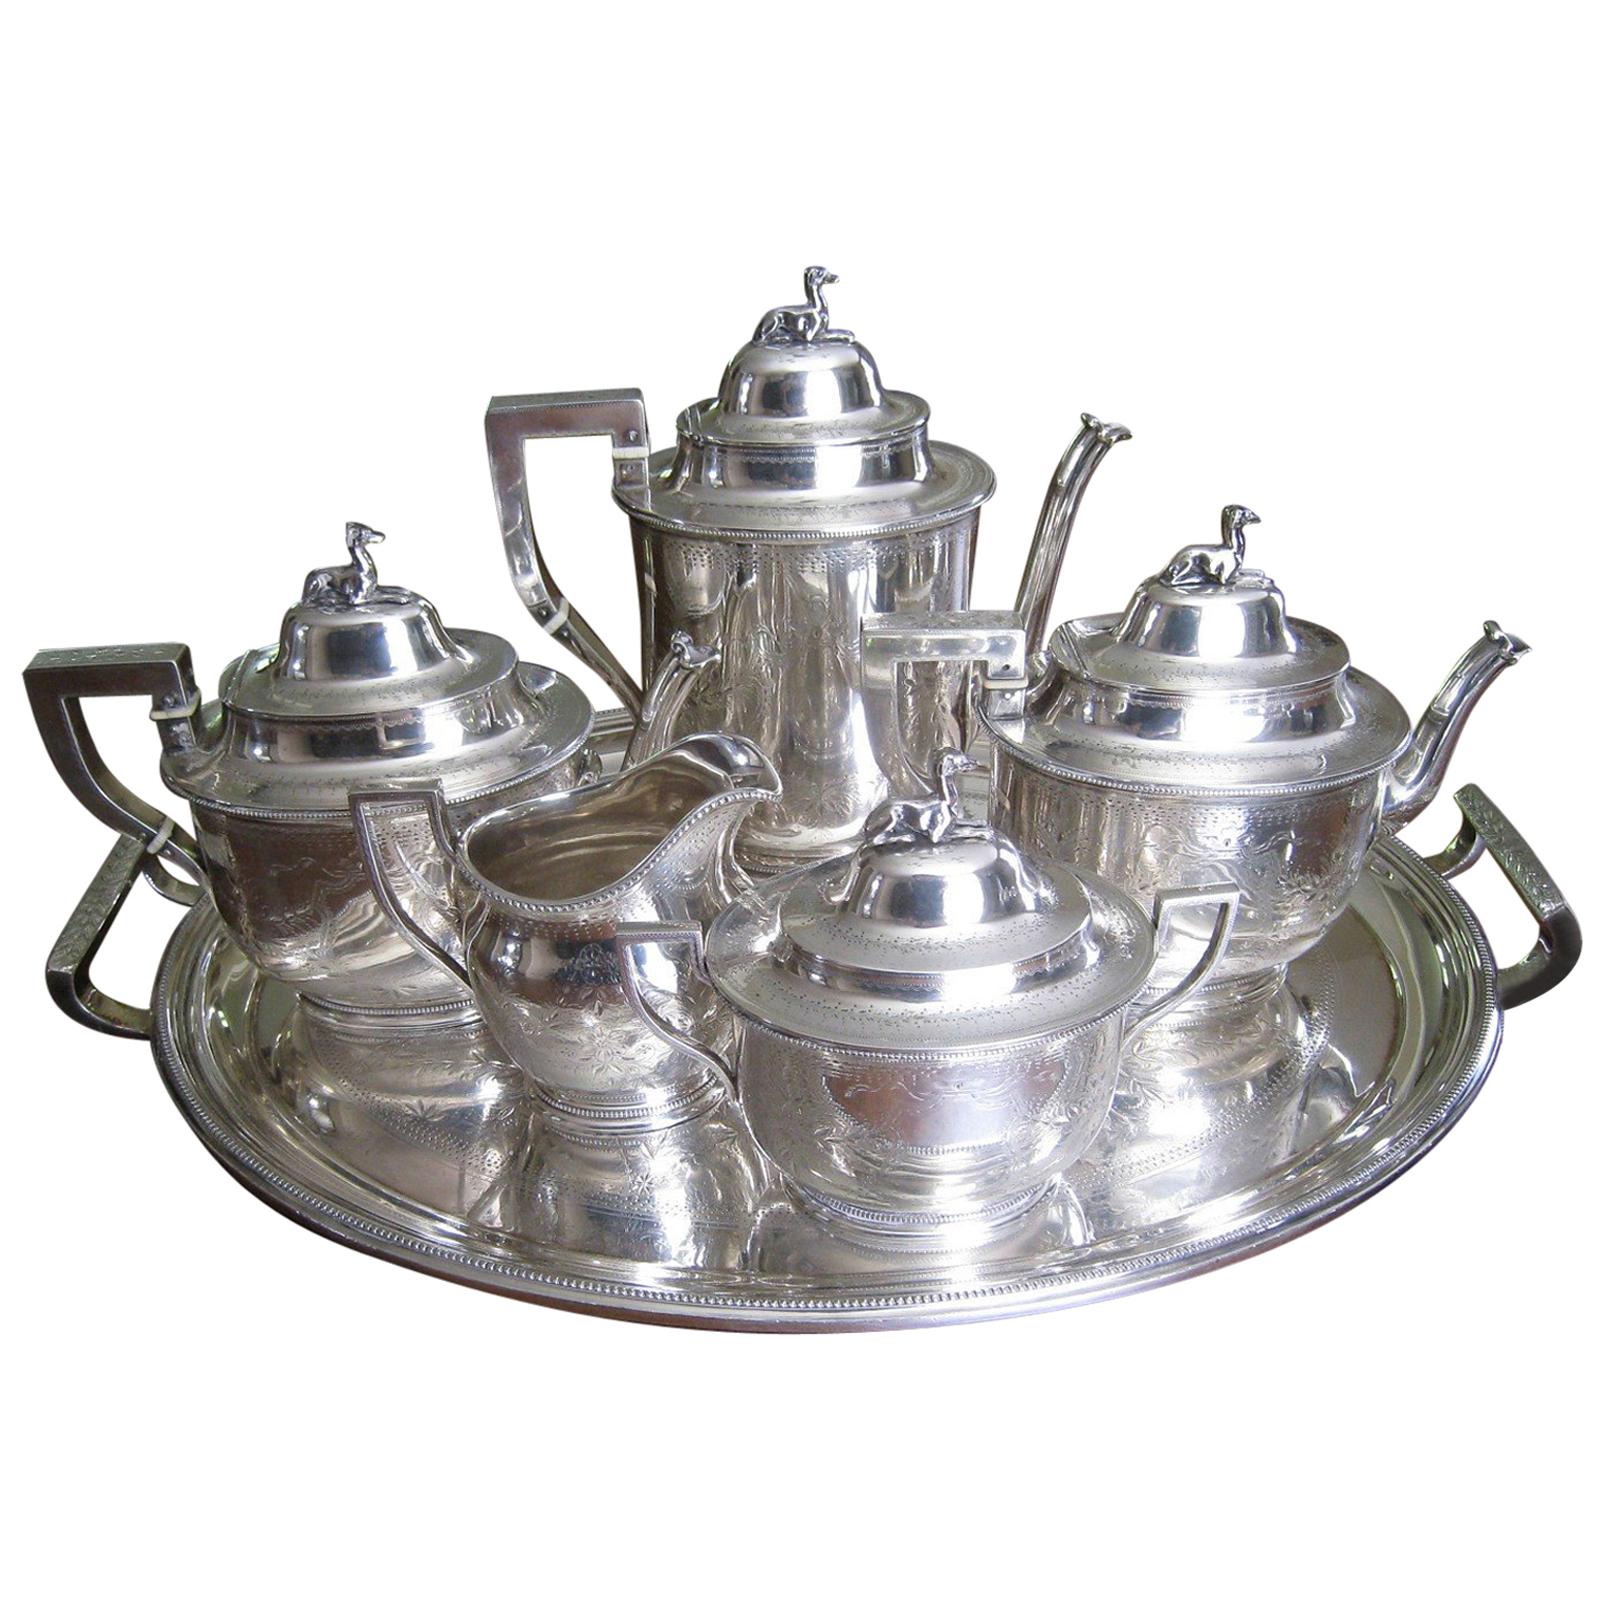 Seven-Piece Rogers & Wendt Coin Silver Tea Set Plus Tray Greyhound Dog Finials For Sale